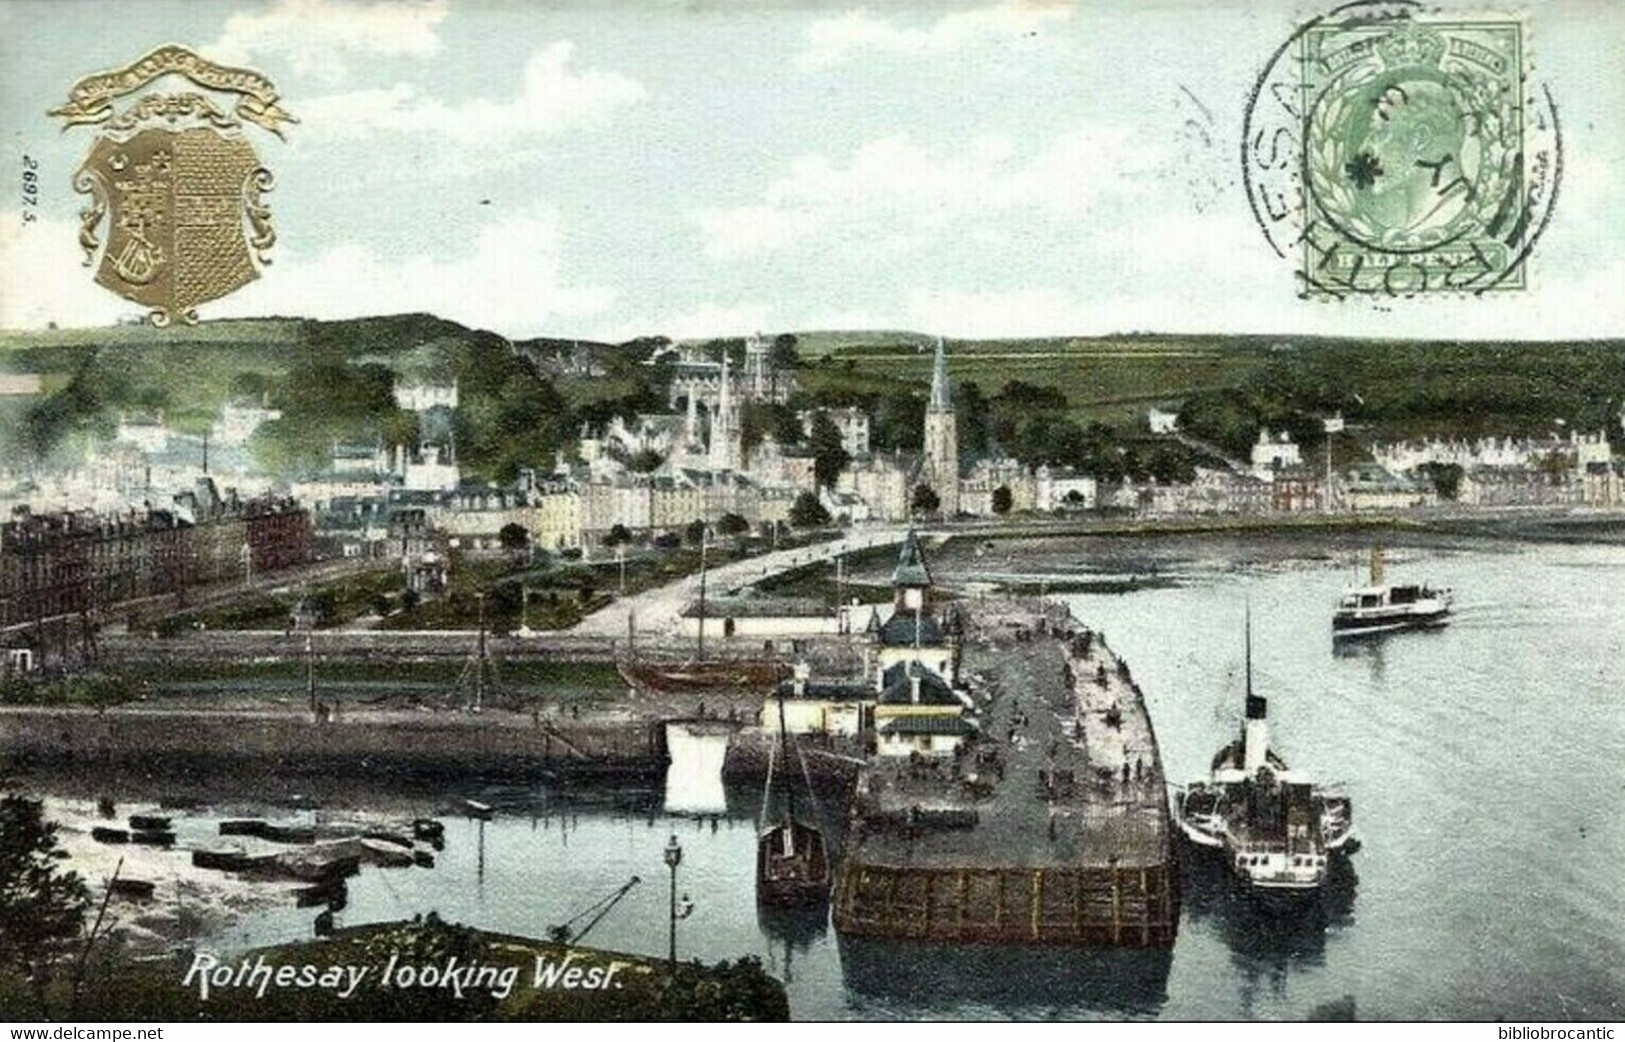 SCOTLAND - ROTHESAY - LOOKING WEST1905 - Bute